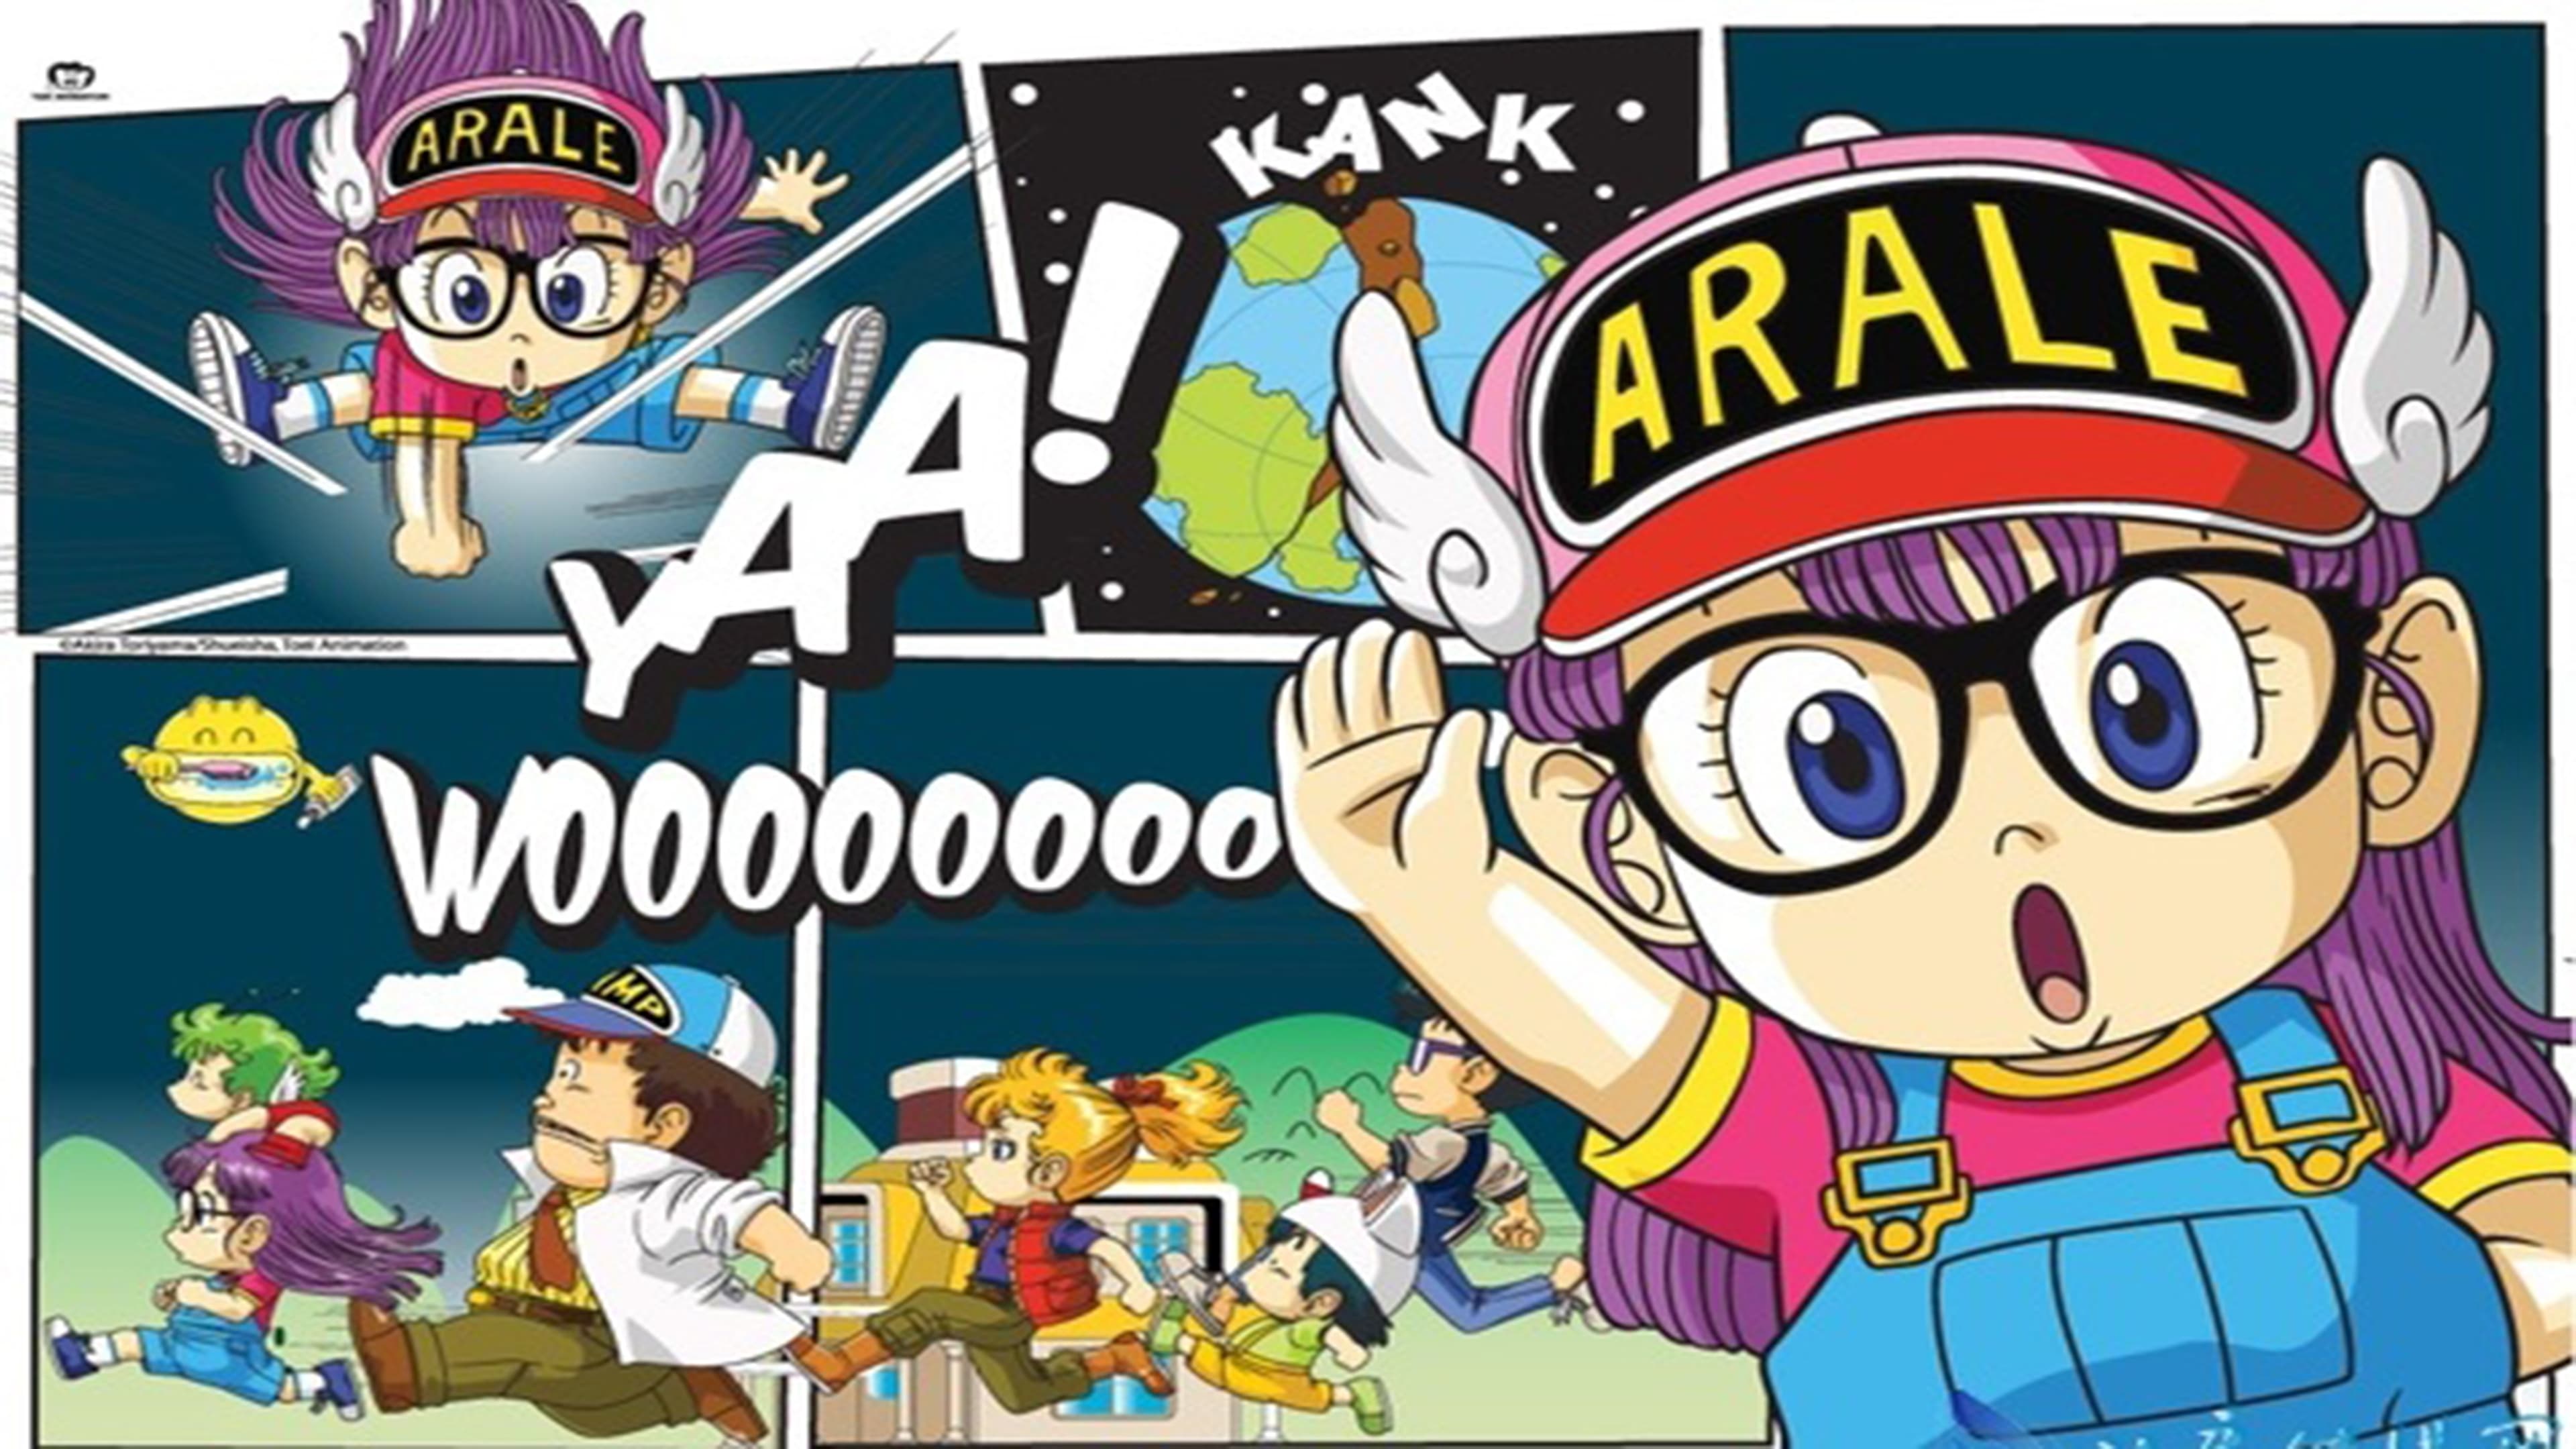 The Ultimate Love and Righteousness... Arale in a Great Pinch!